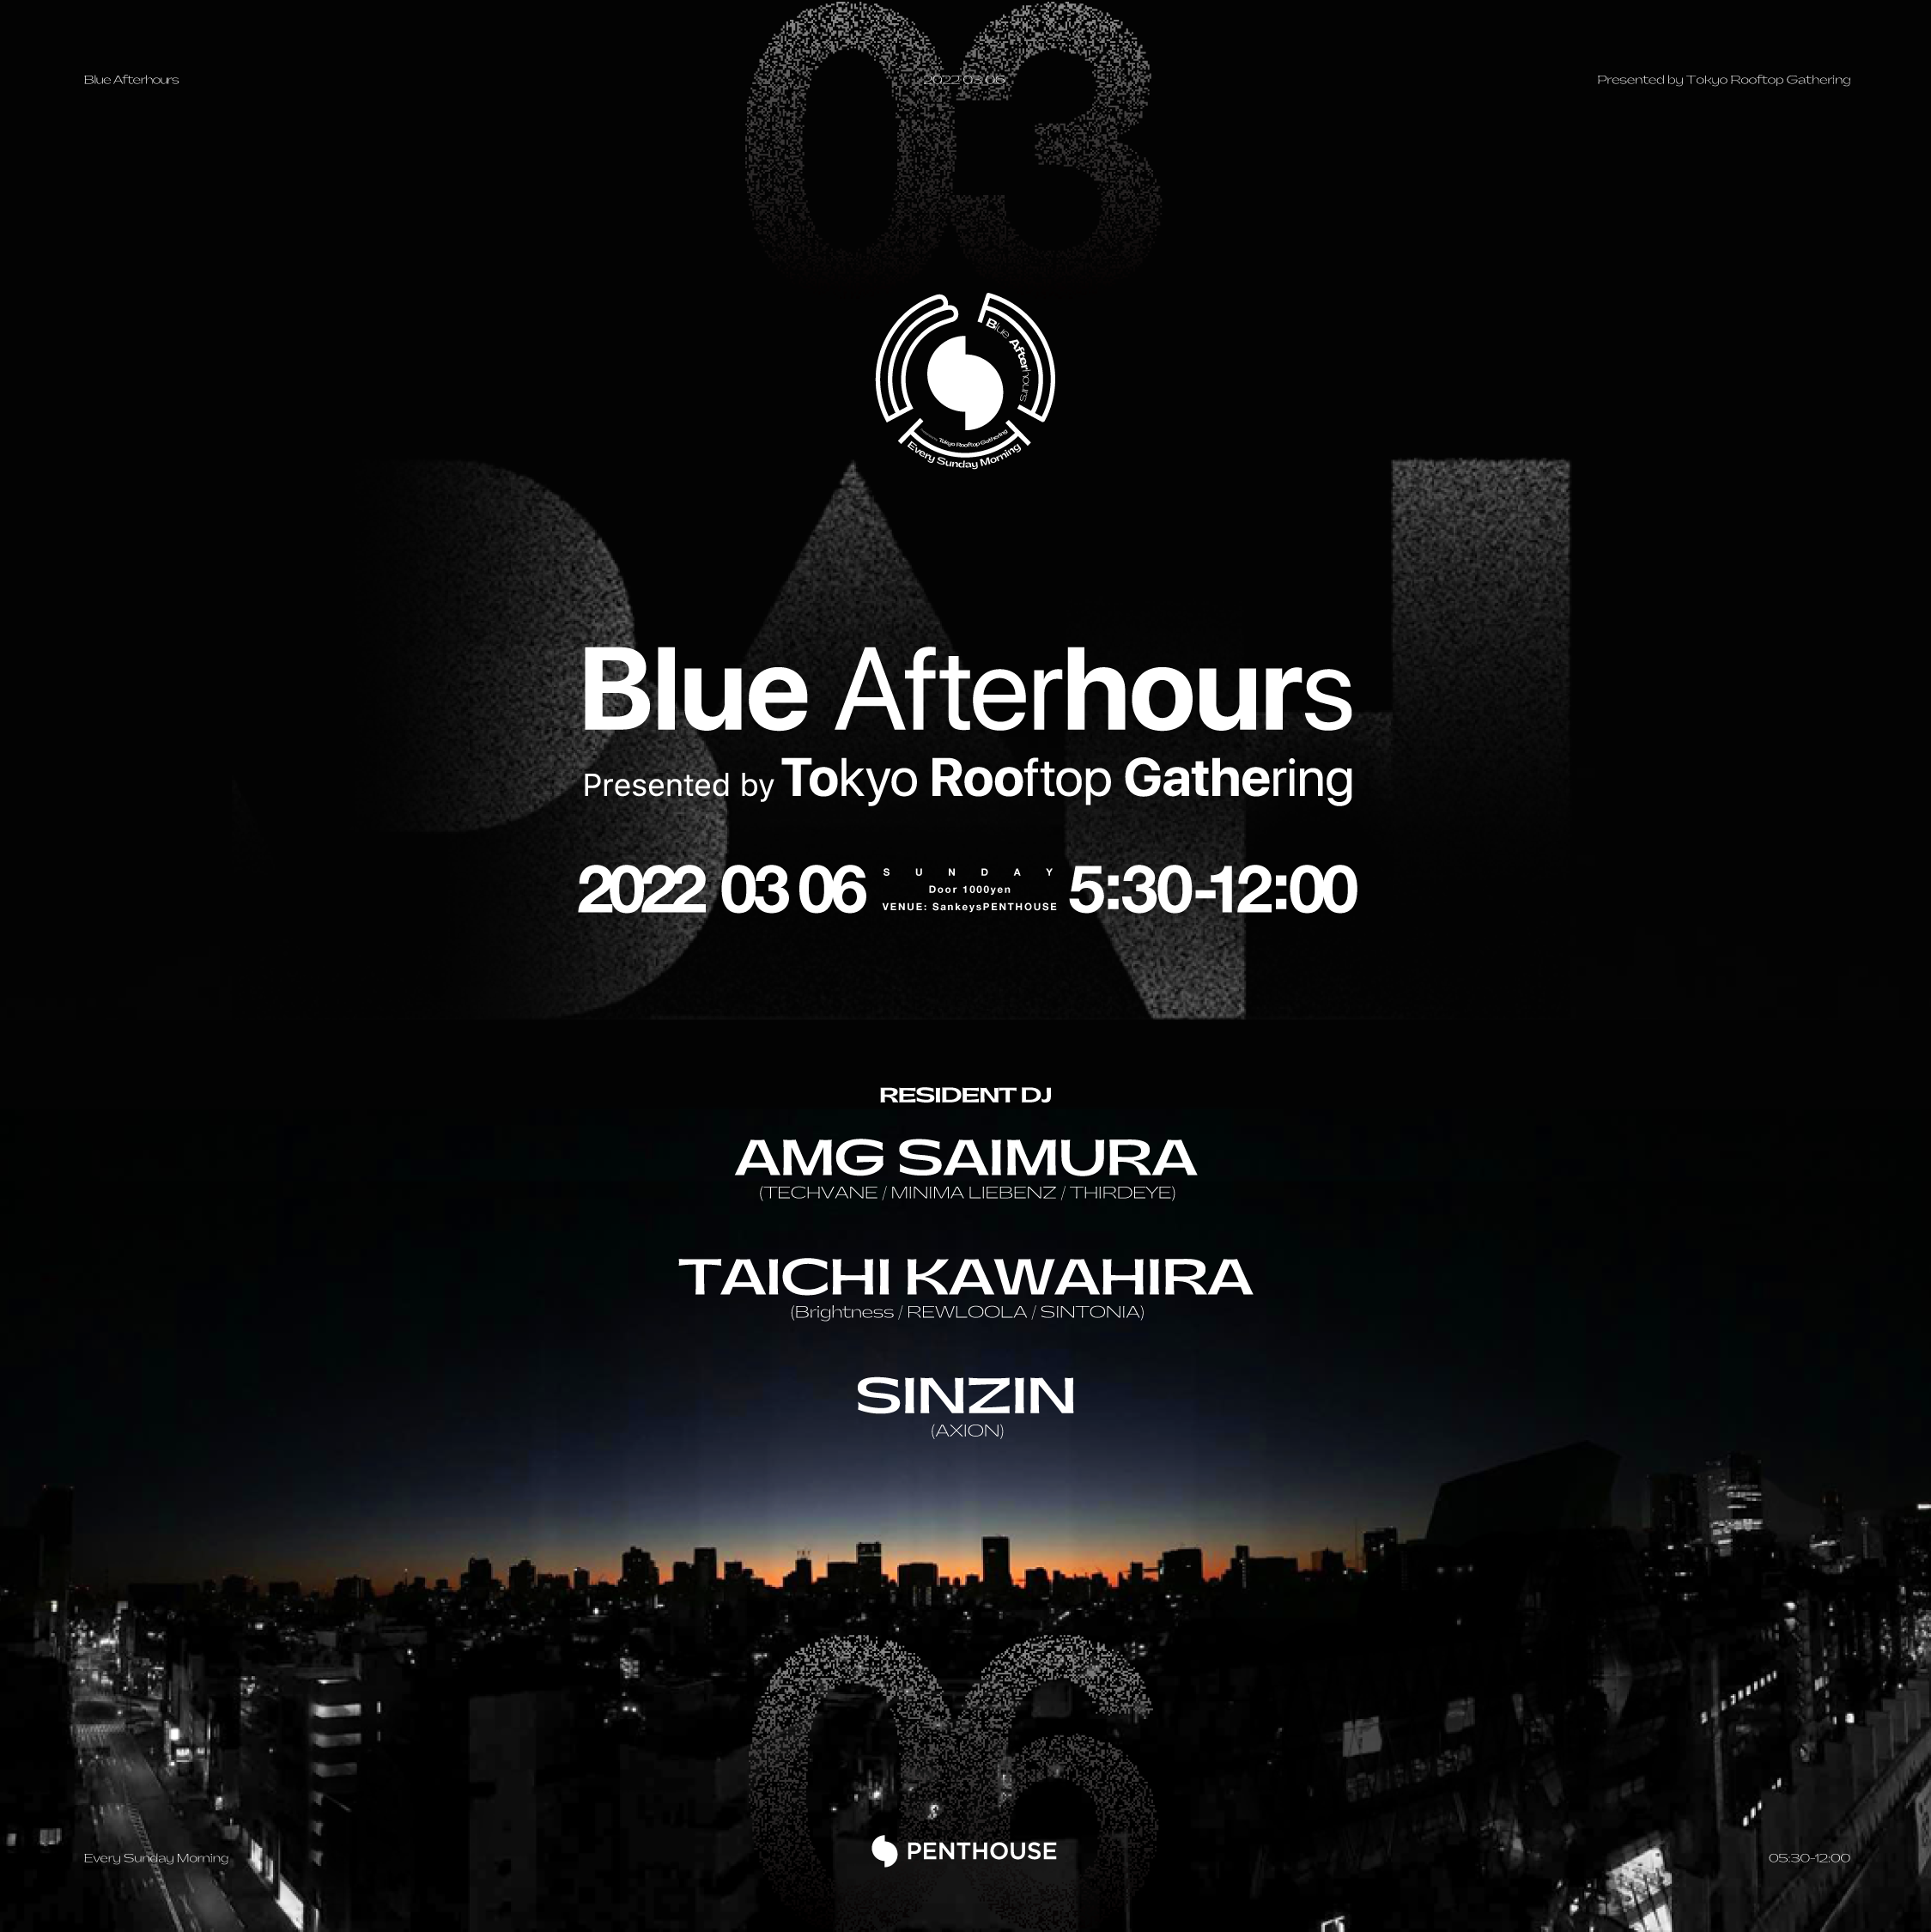 Blue Afterhours by Tokyo Rooftop Gathering